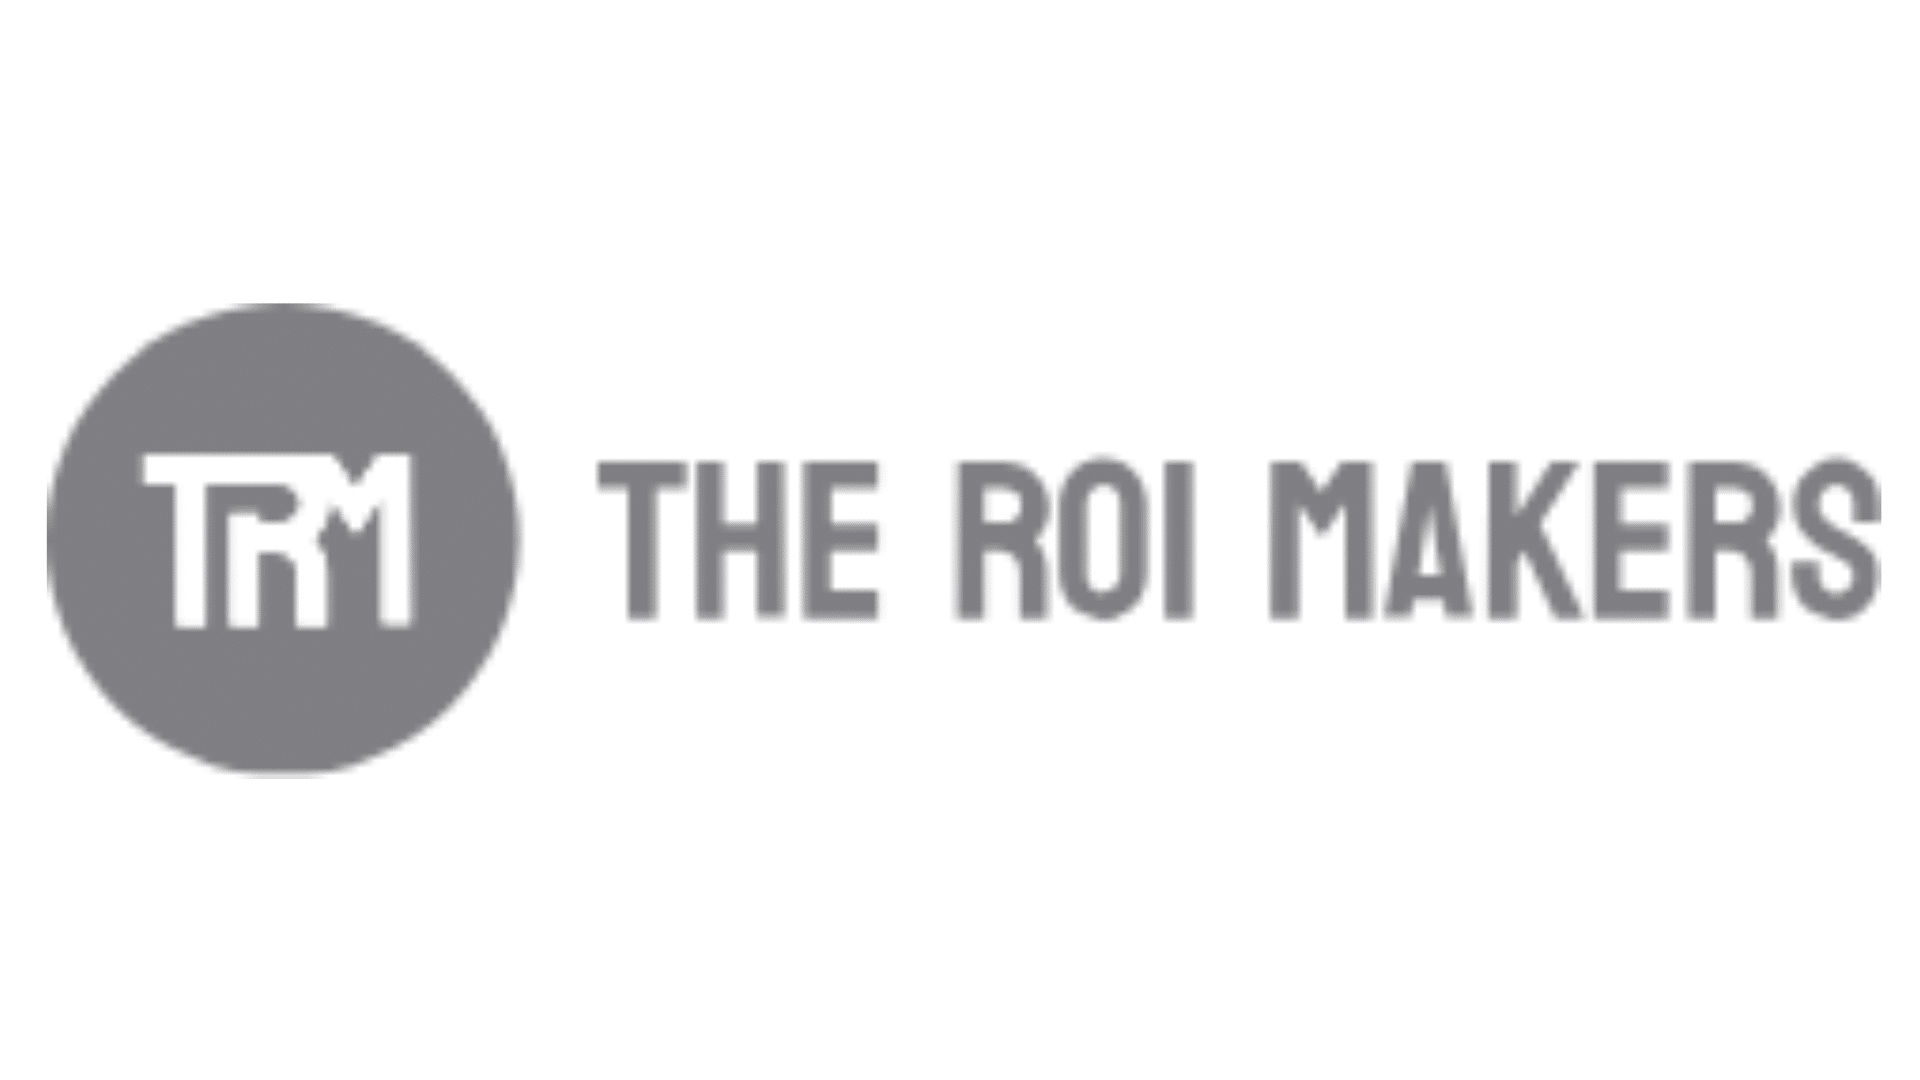 The ROI Makers